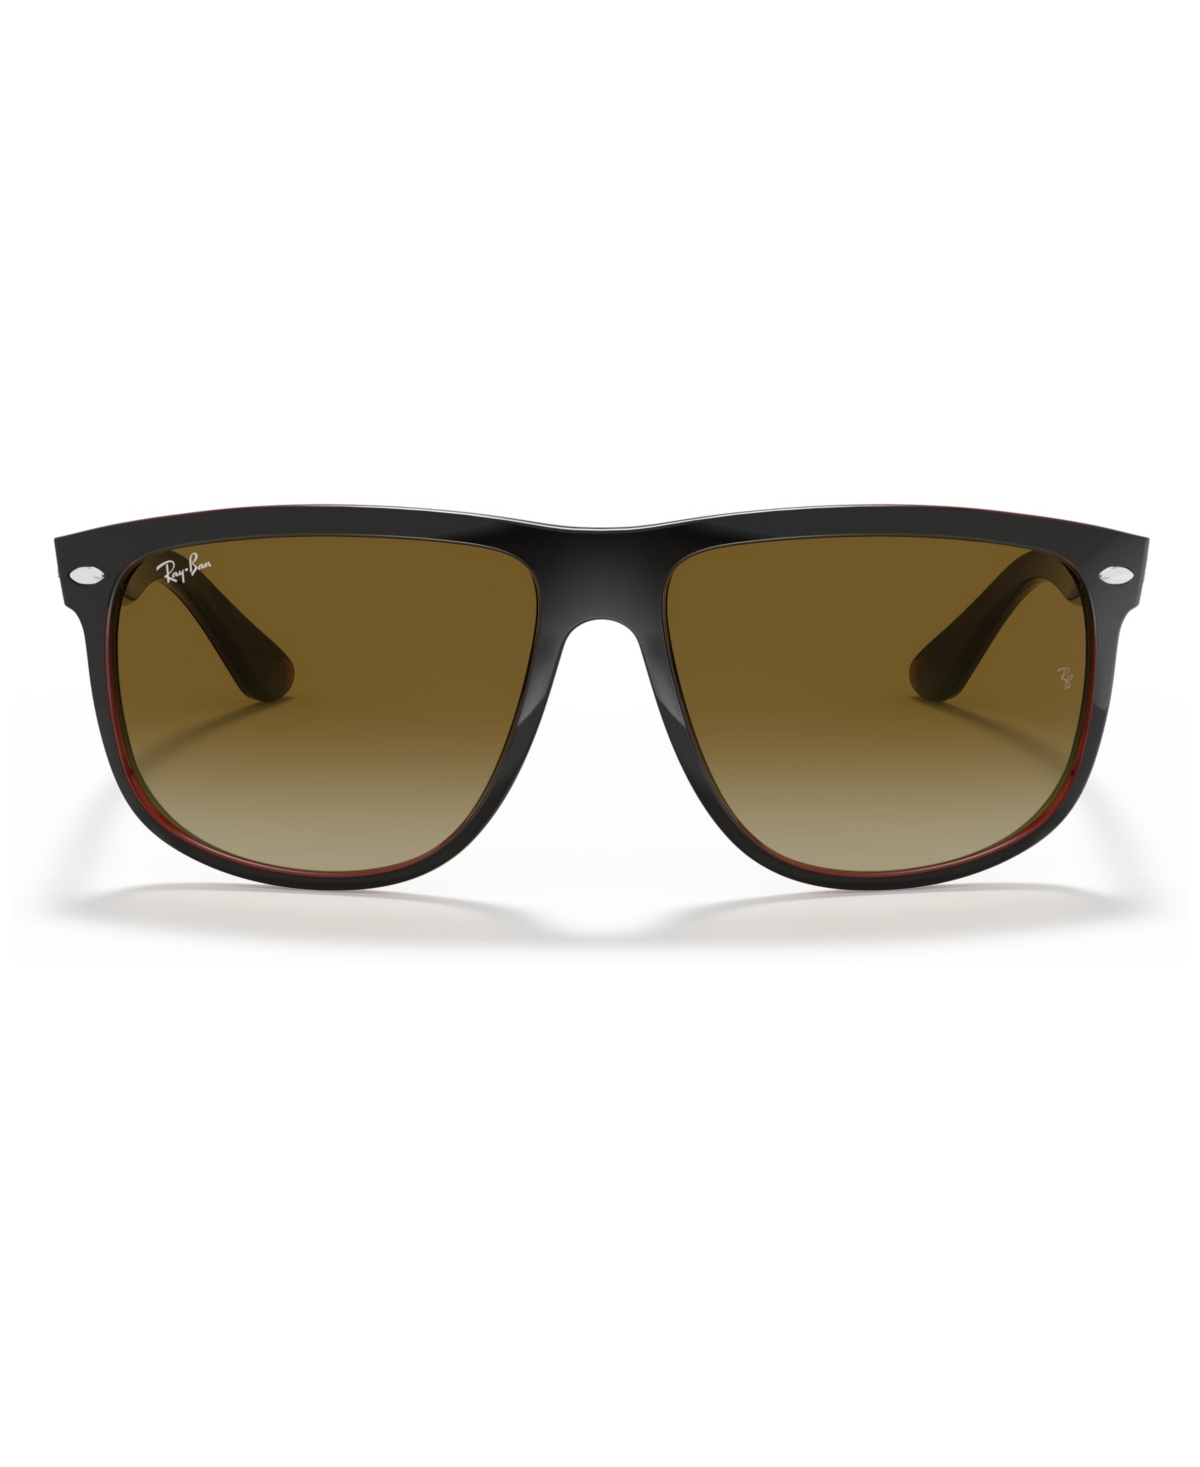 Ray Ban Ray-ban Sunglasses, Rb4147 In Multicolor,brown